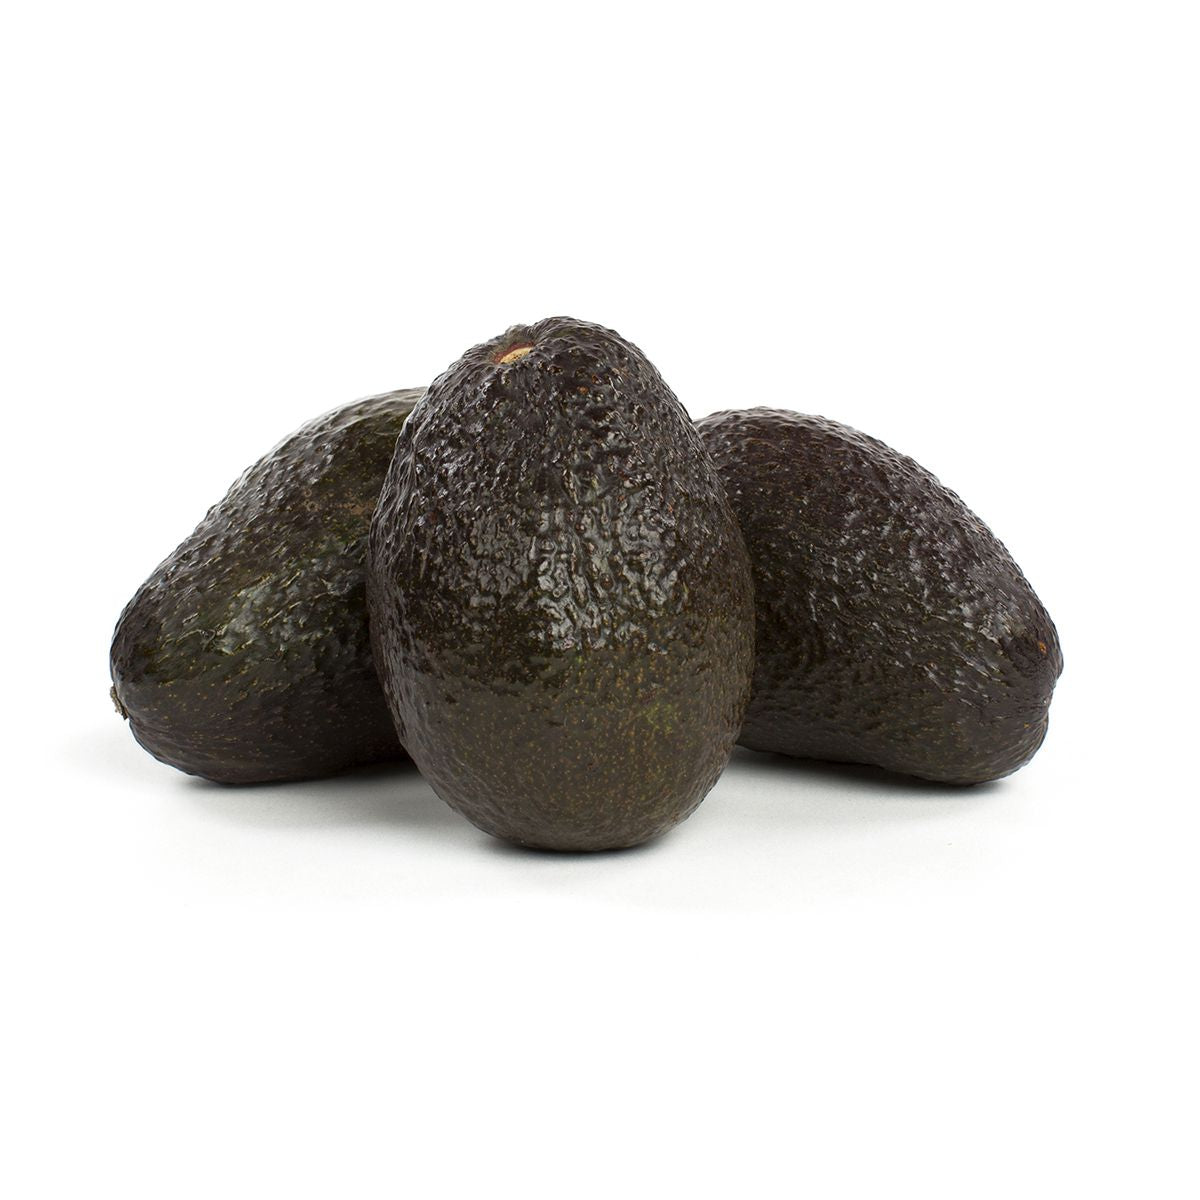 Avocados From Mexico Organic Firm Hass Avocados 32-36 Ct